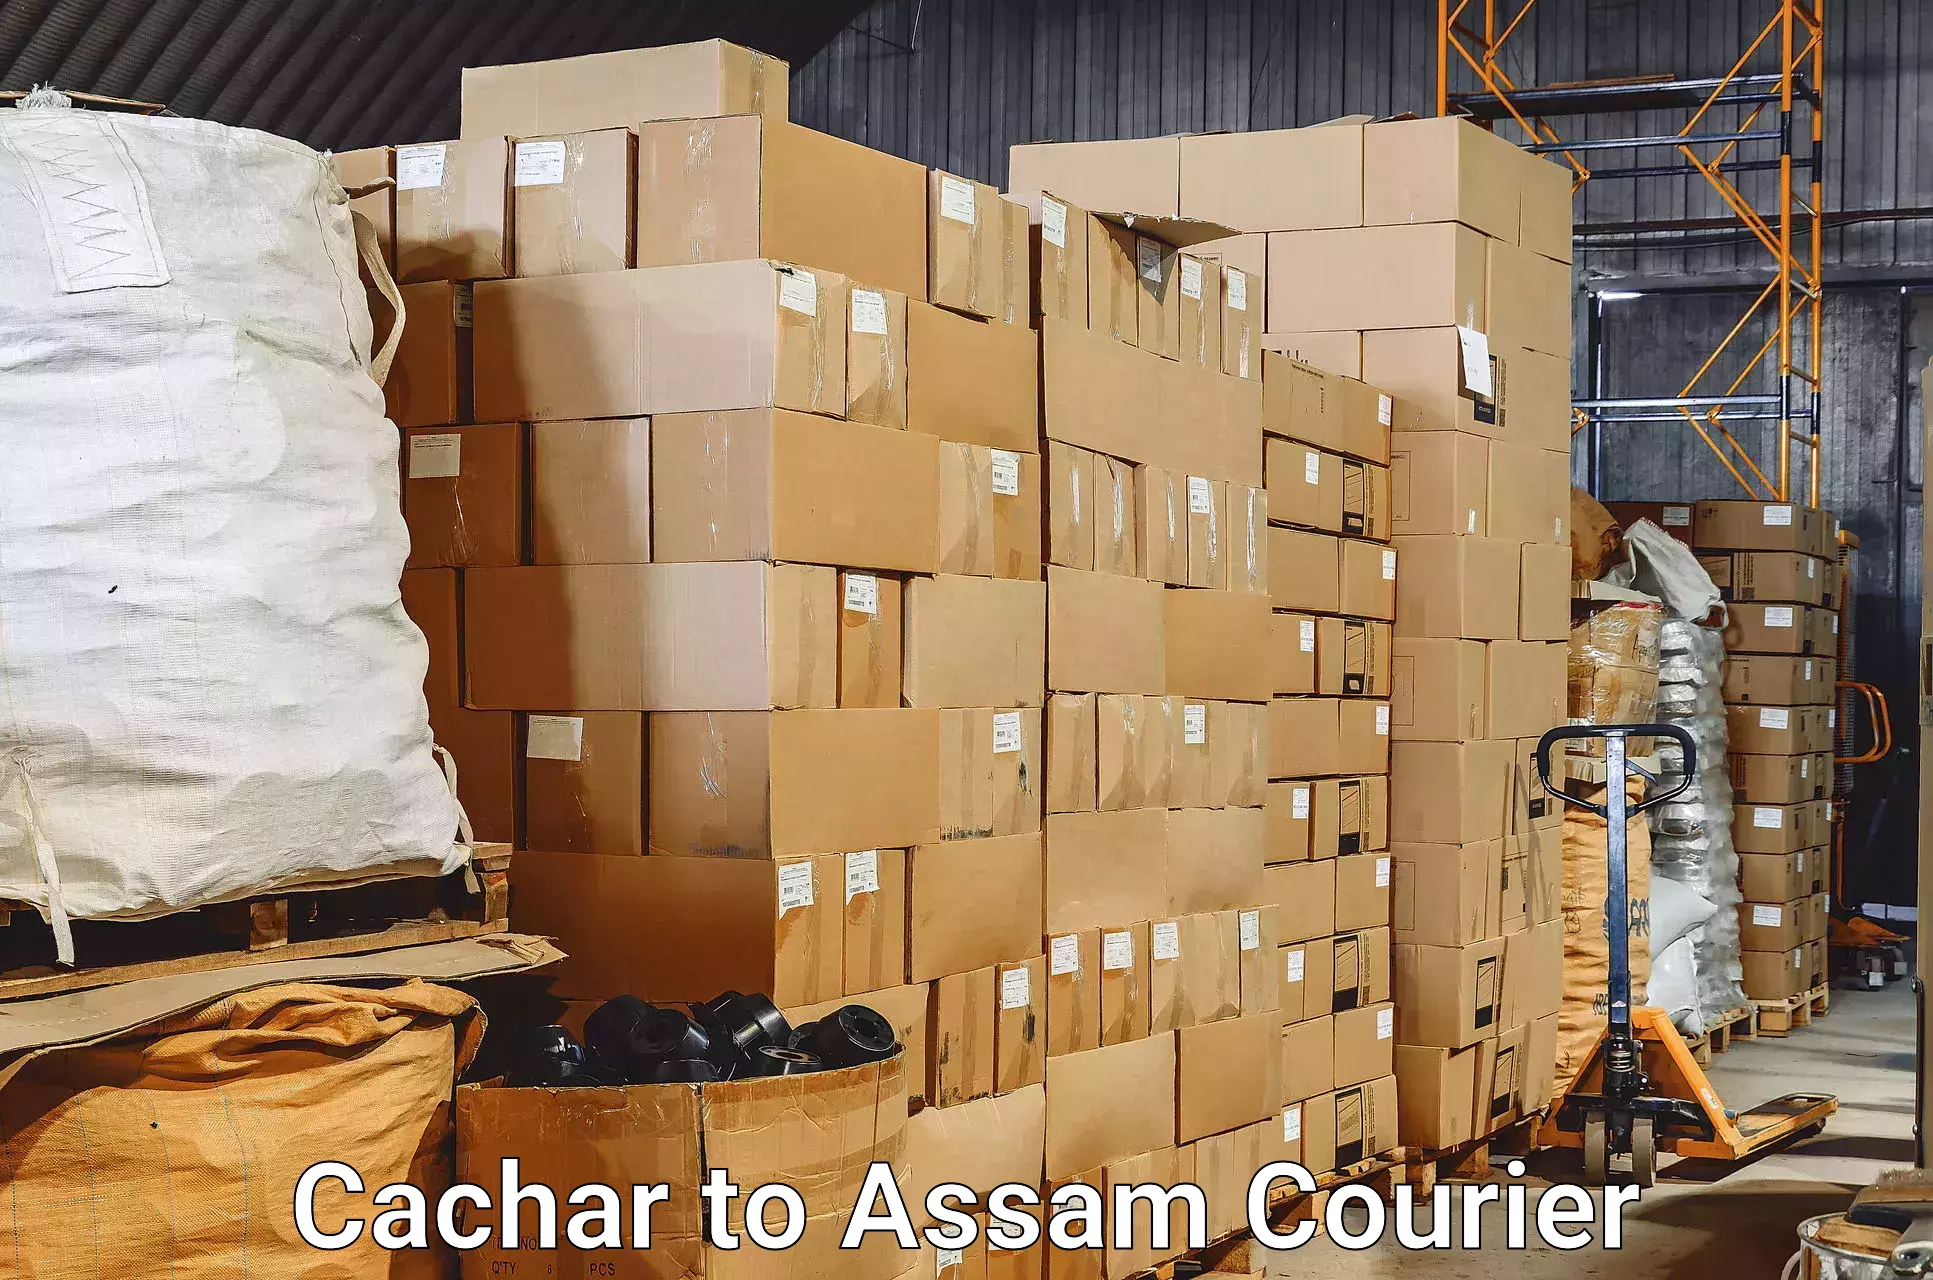 Same day baggage transport Cachar to Lala Assam